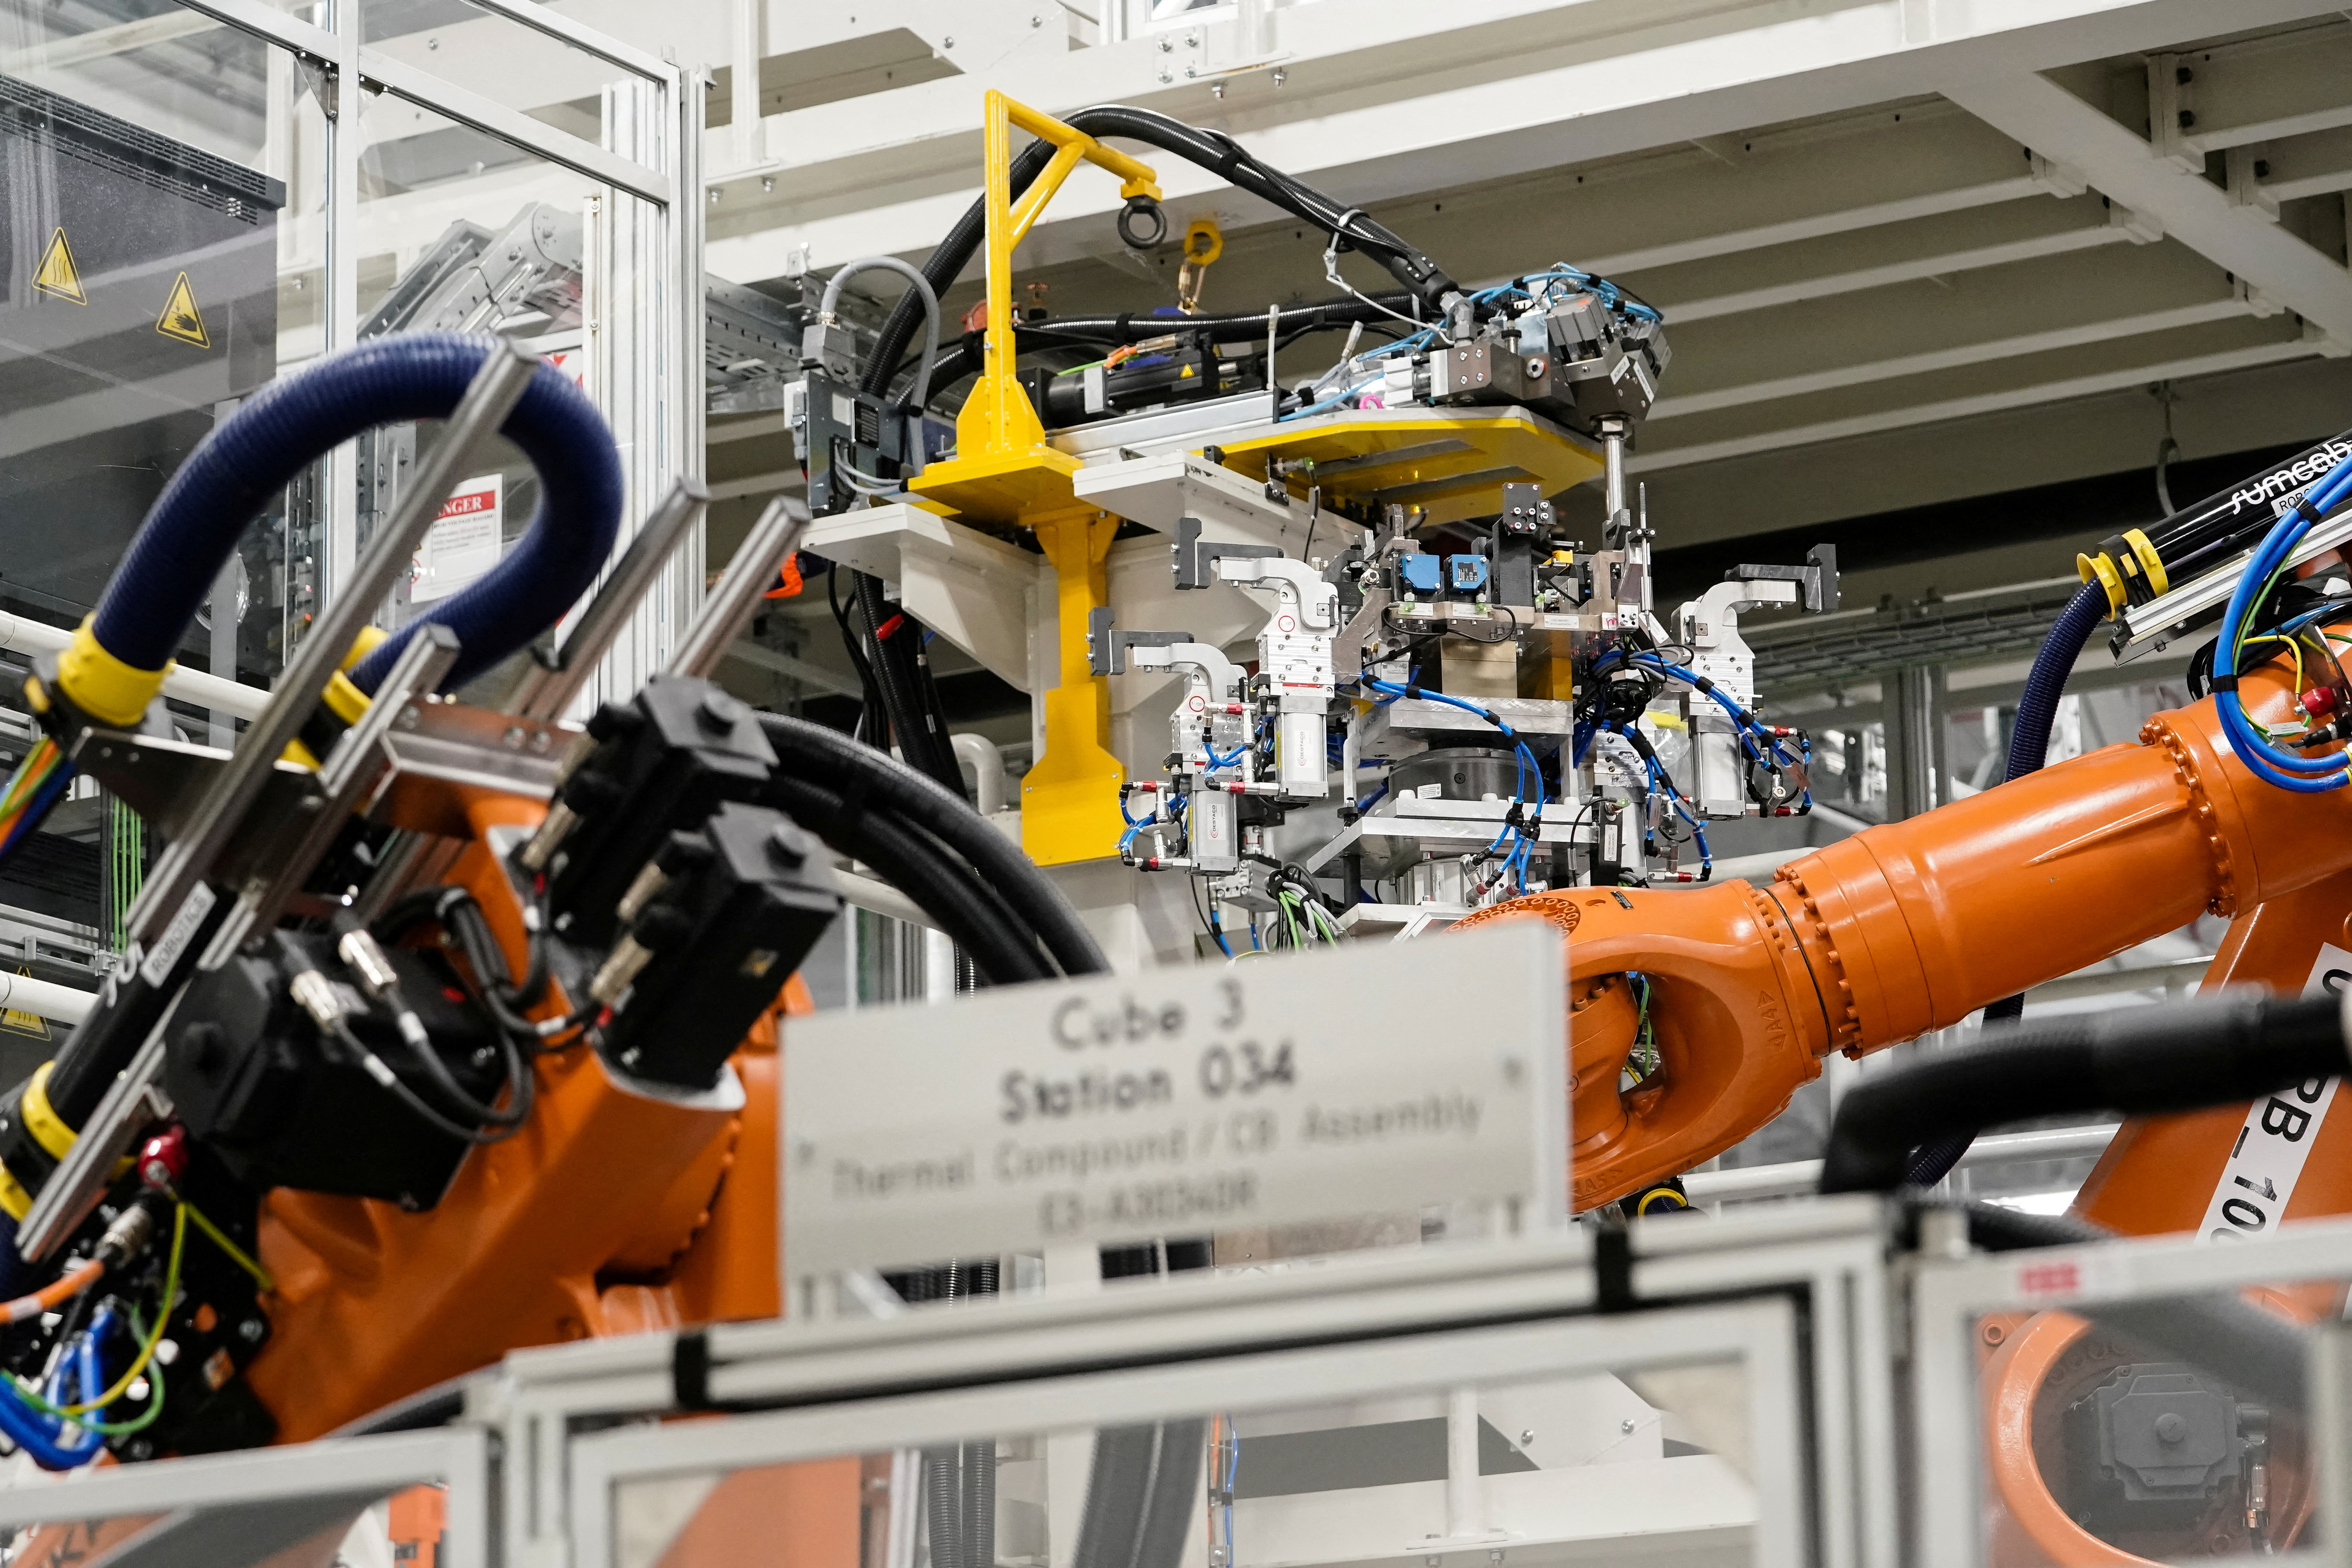 The electric vehicle battery tray assembly line is seen at the opening of the Battery Factory for the Mercedes-Benz plant in Alabama